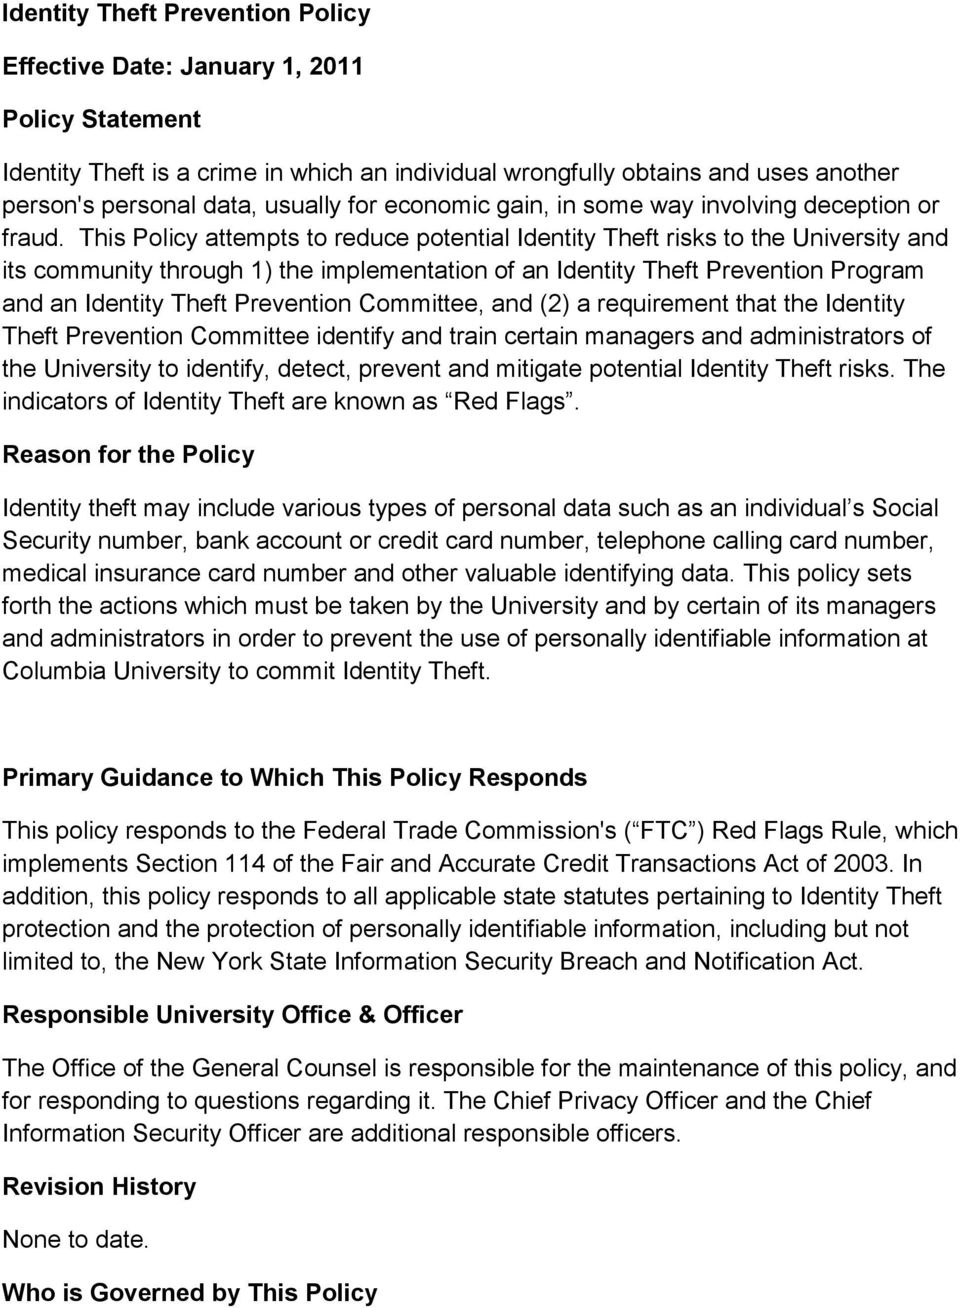 This Policy attempts to reduce potential Identity Theft risks to the University and its community through 1) the implementation of an Identity Theft Prevention Program and an Identity Theft